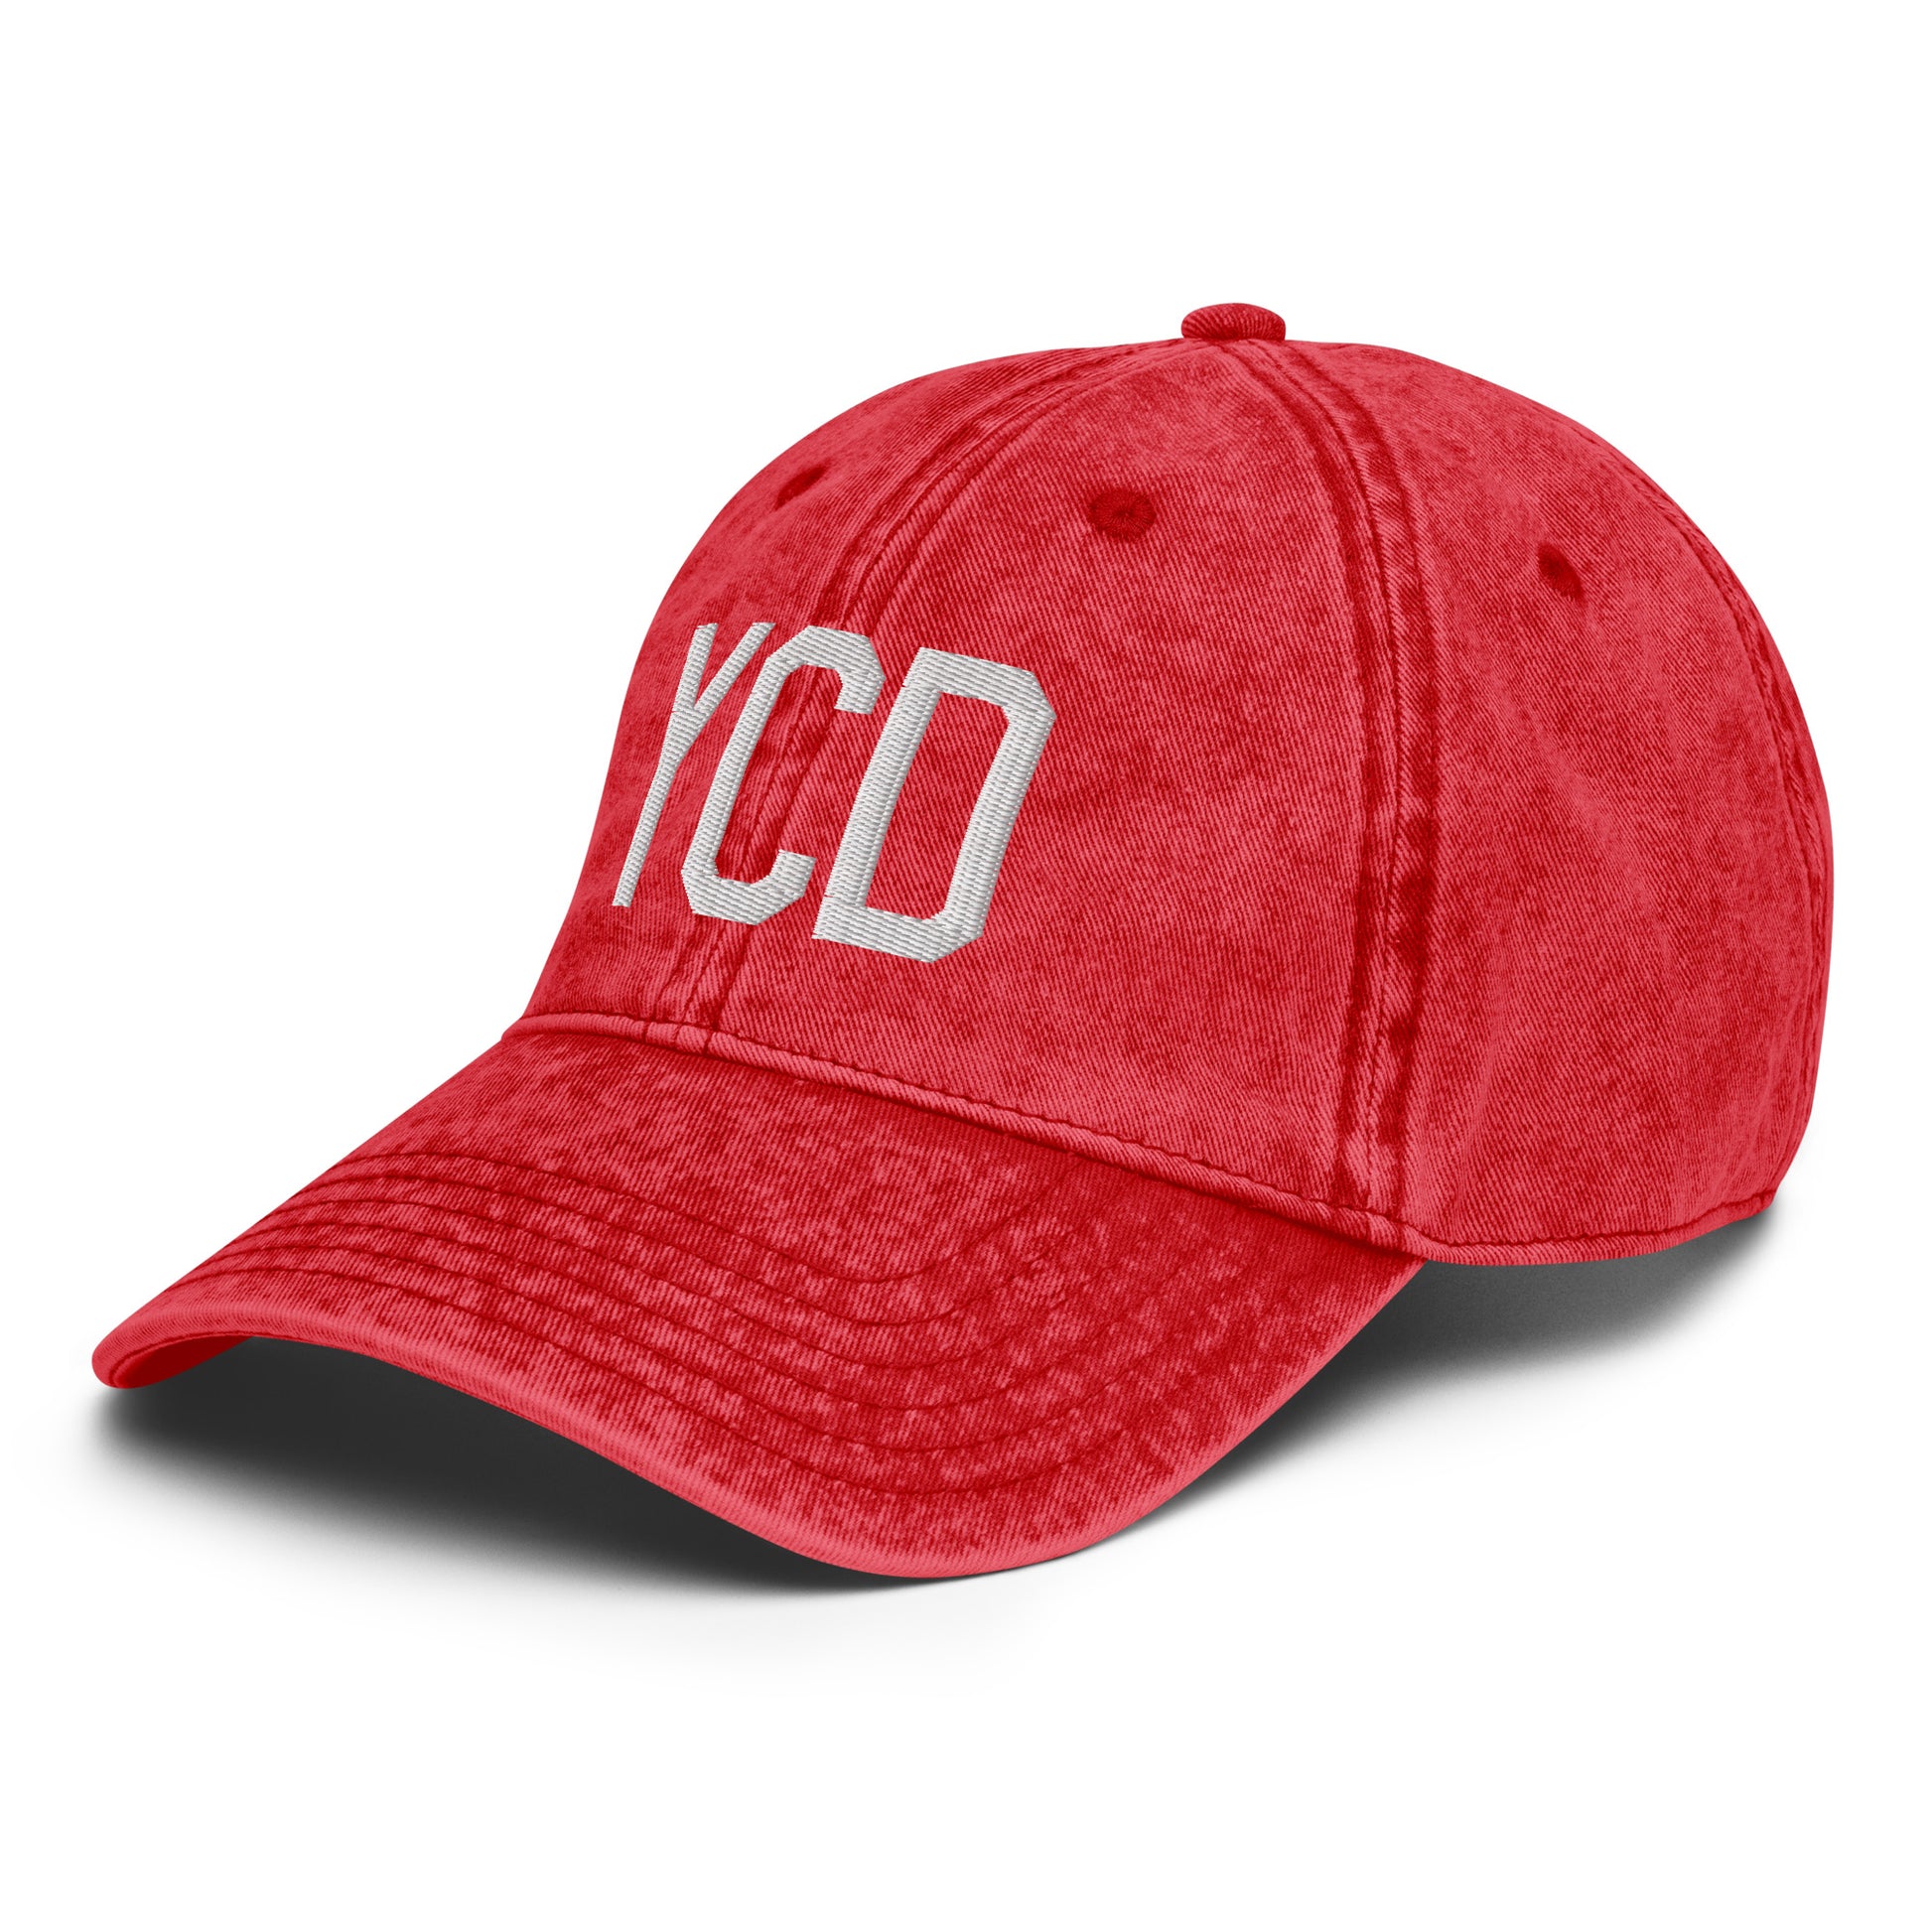 Airport Code Twill Cap - White • YCD Nanaimo • YHM Designs - Image 23